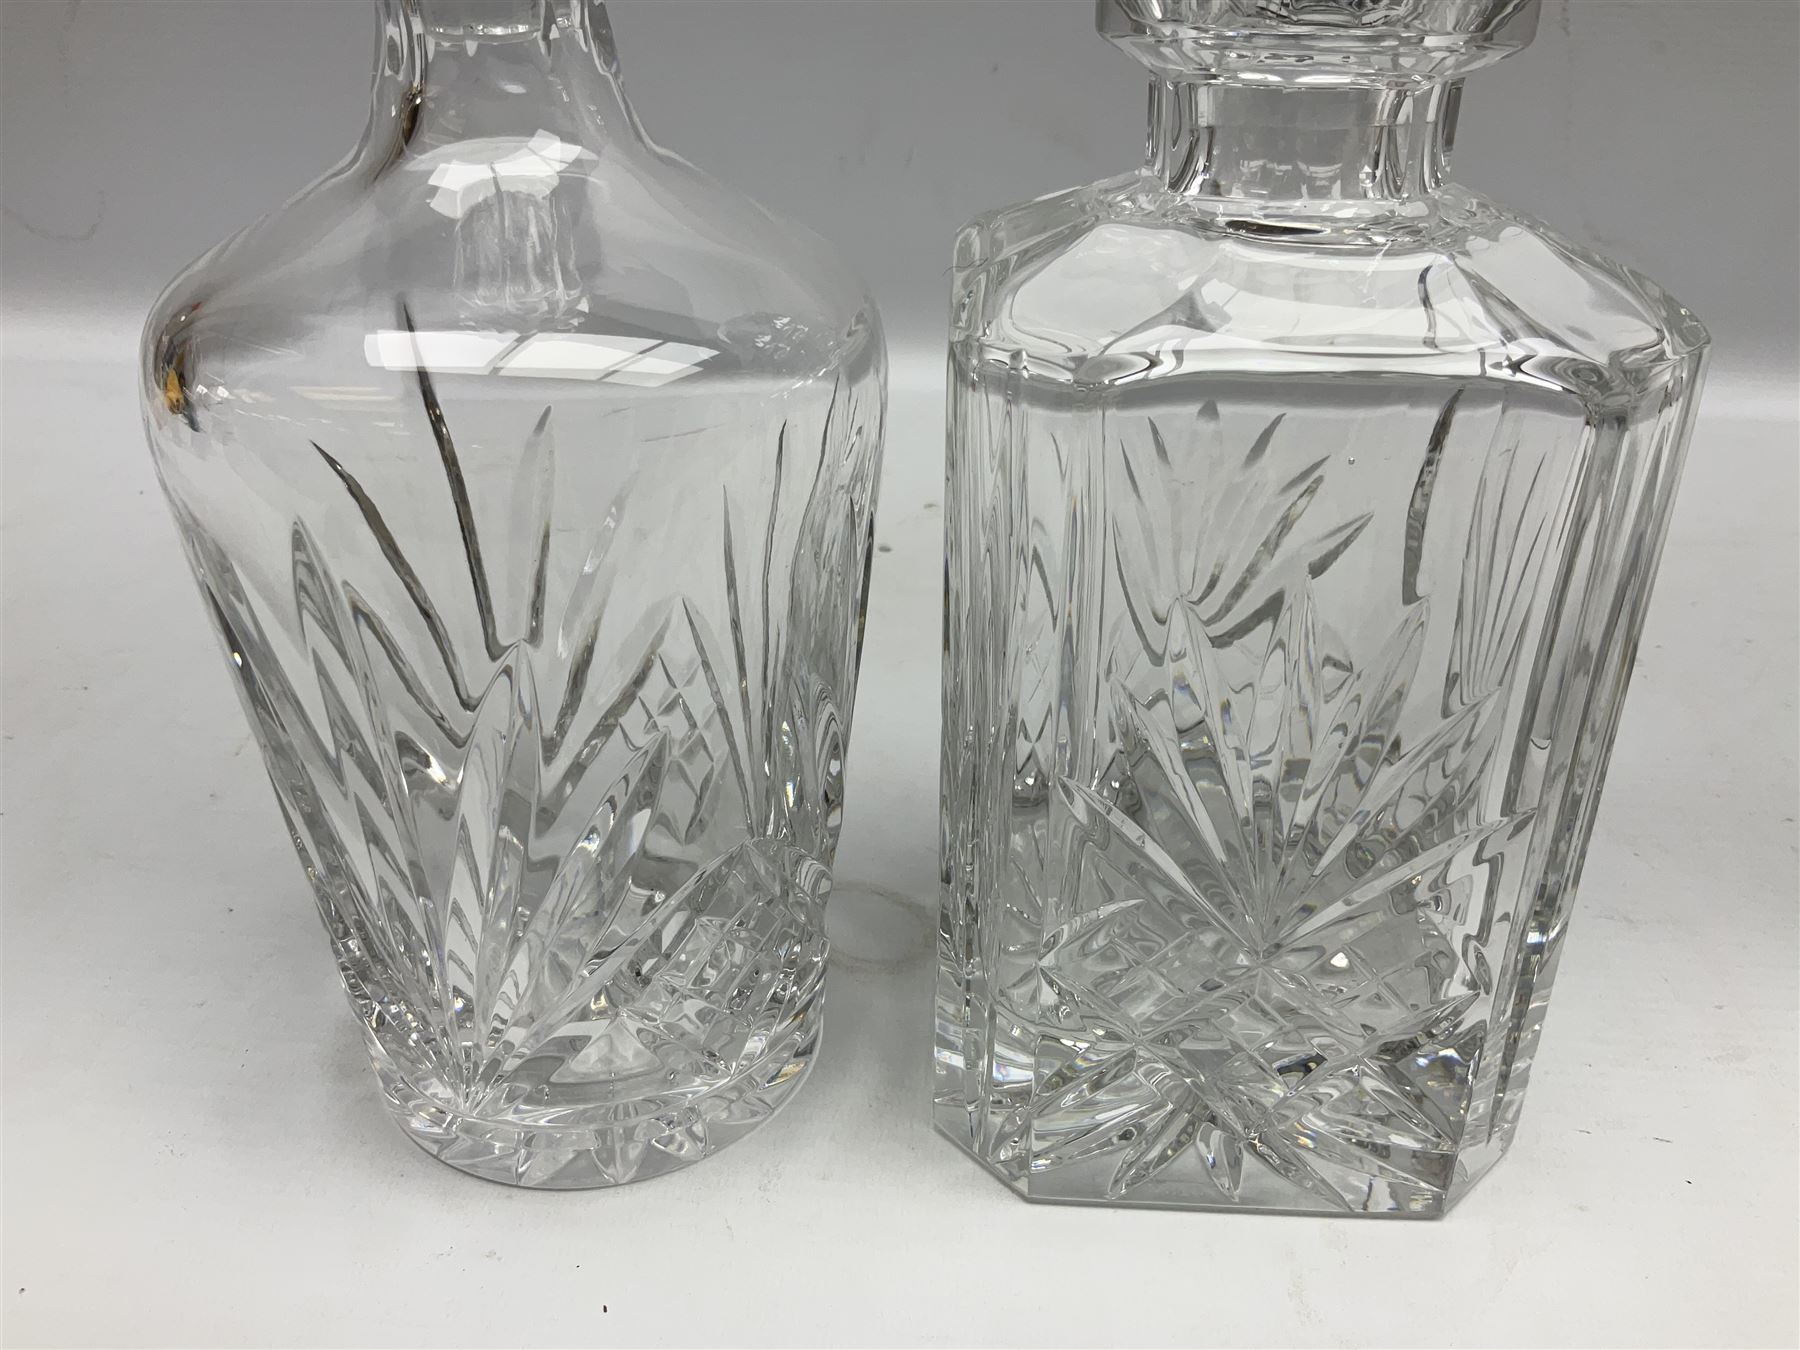 Silver collared cut glass vases - Image 6 of 8